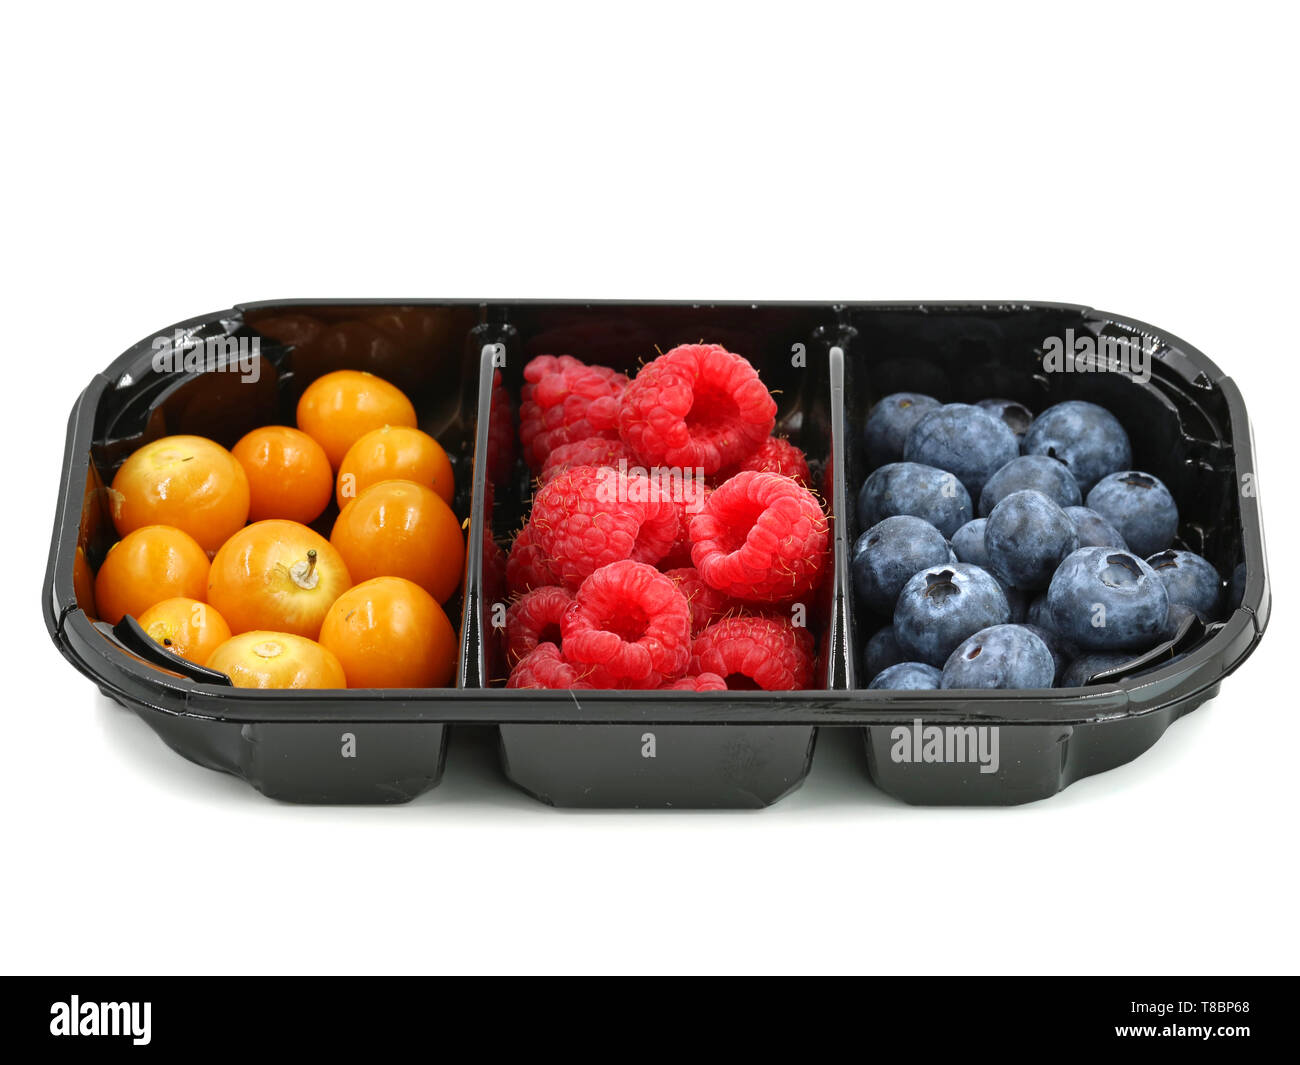 raspberries, blueberries and berries of physalis in black container isolated on white background Stock Photo